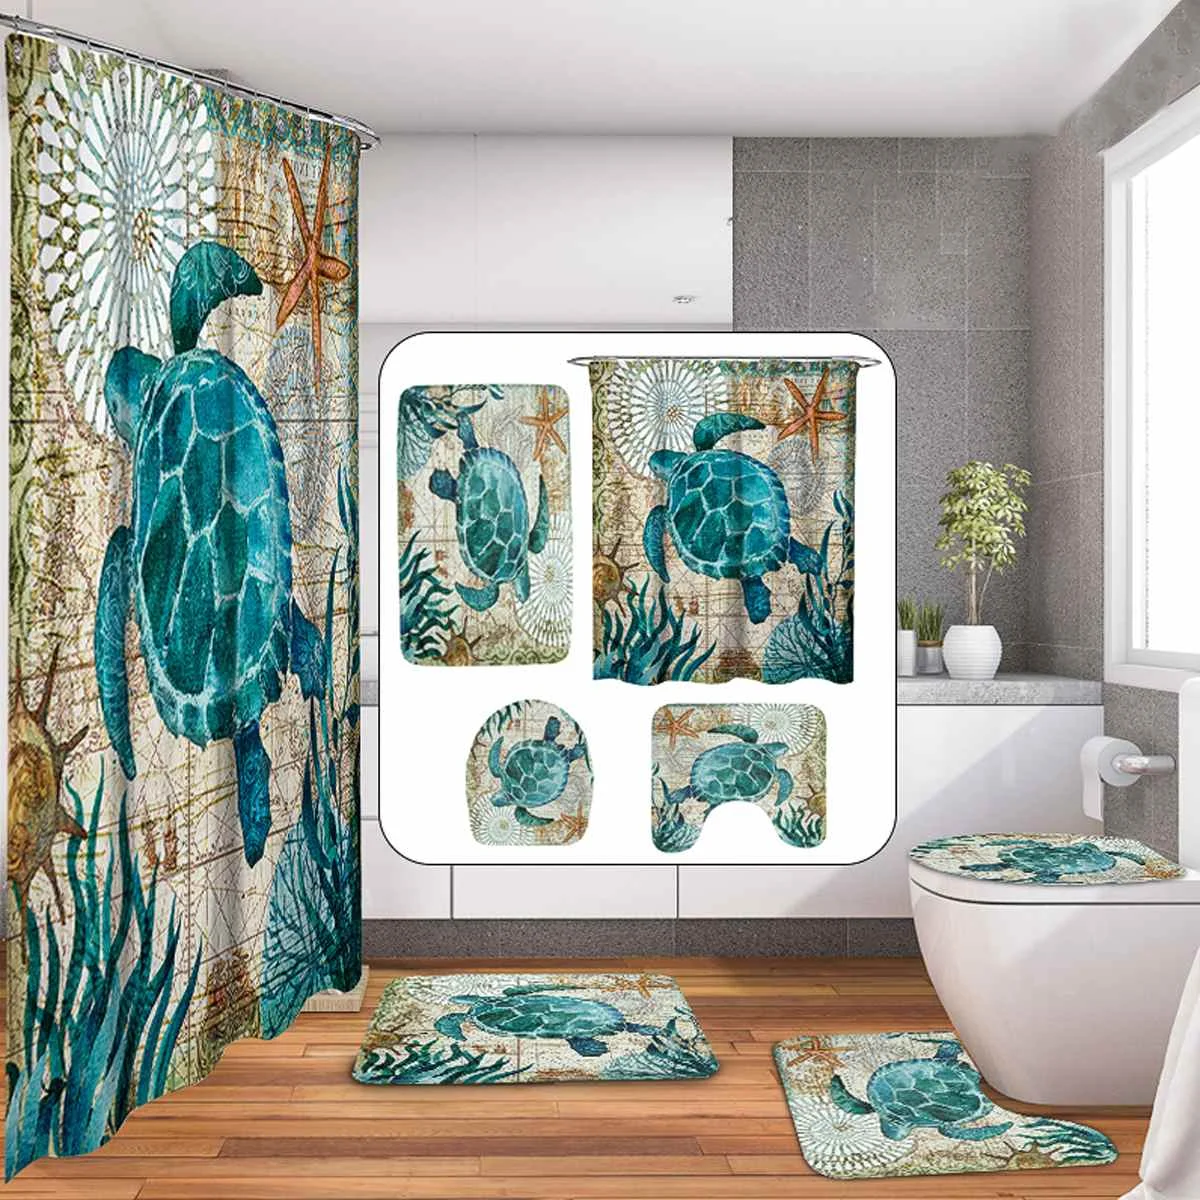 Sea Turtle 4-In-1 Bathroom Shower Curtain Set with Non Slip Toilet Cover & Floor Mats